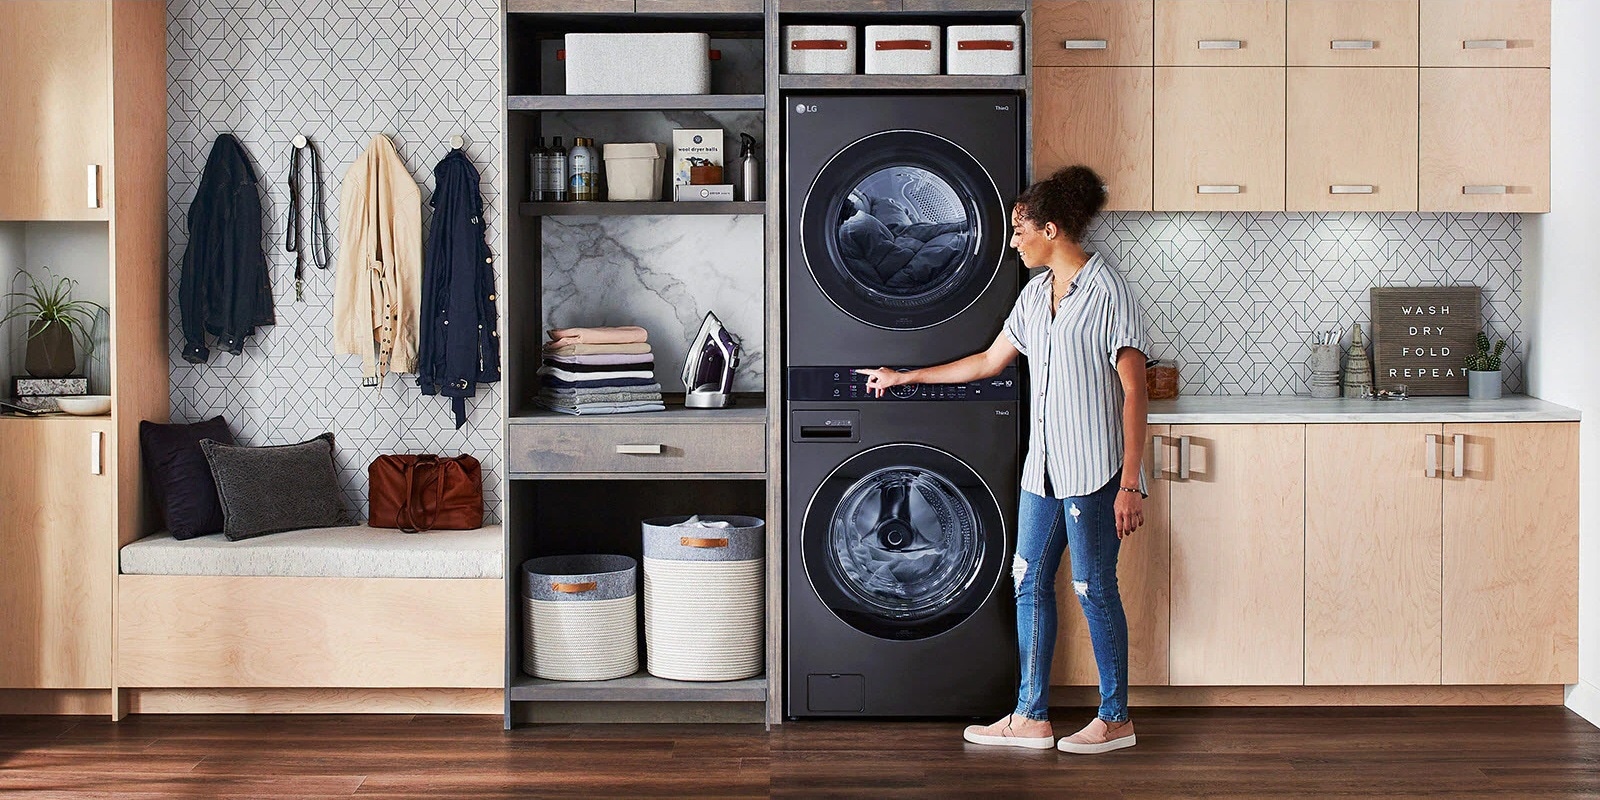 https://www.lg.com/au/images/washing-machines/md07530439/Features/Washtower-More-Space_D1.jpg